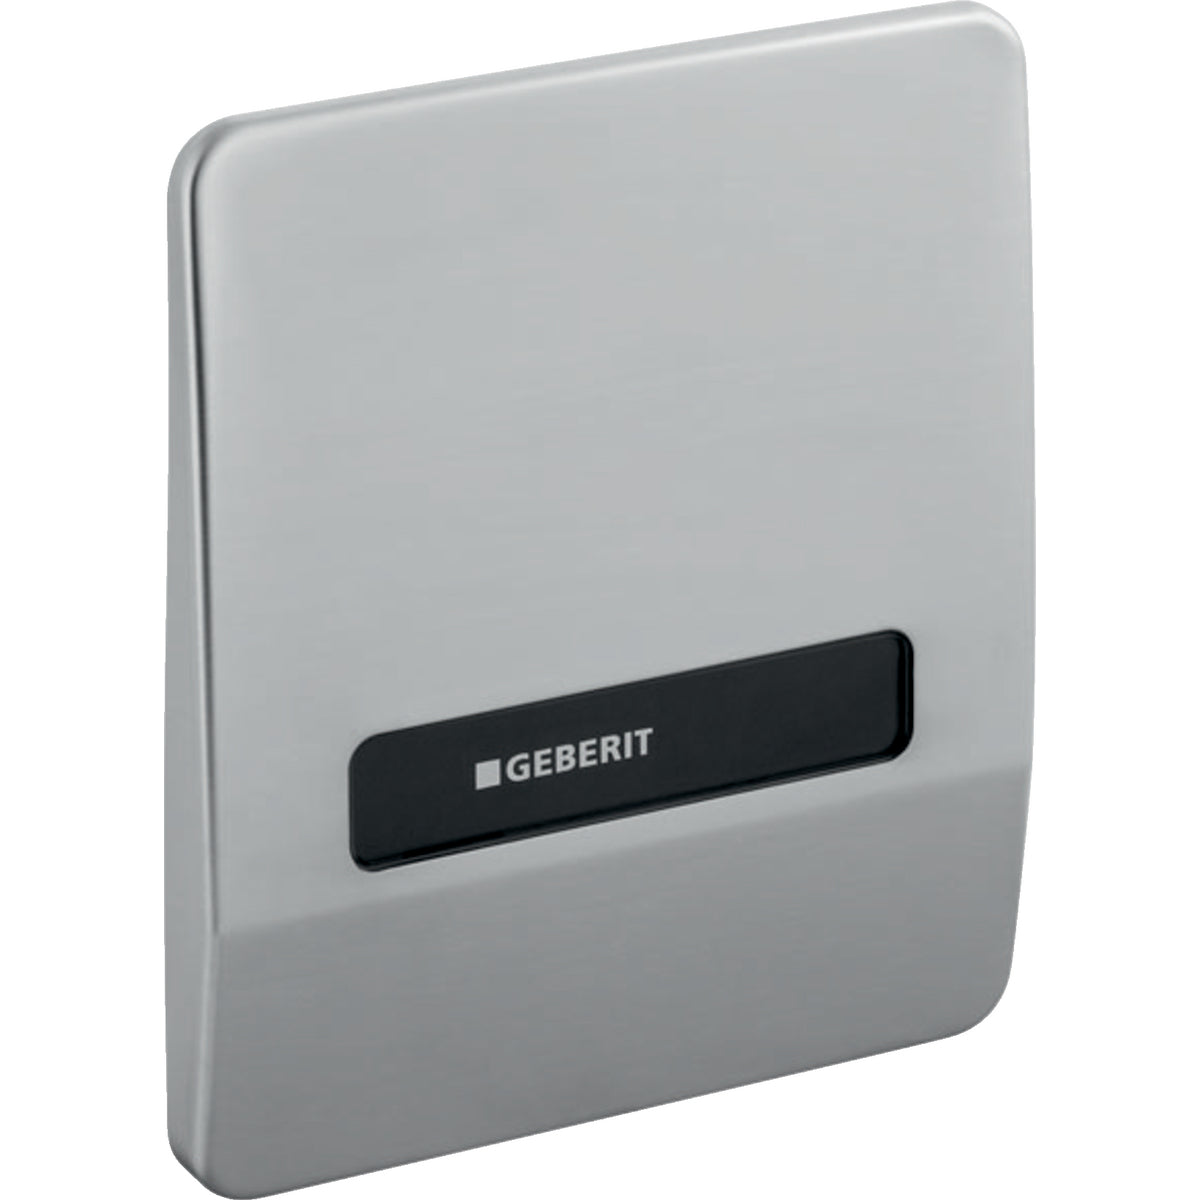 Geberit 240.841.00.1- Geberit conversion set IR with cover plate, for urinal flush control, electronic, Highline - FaucetExpress.ca